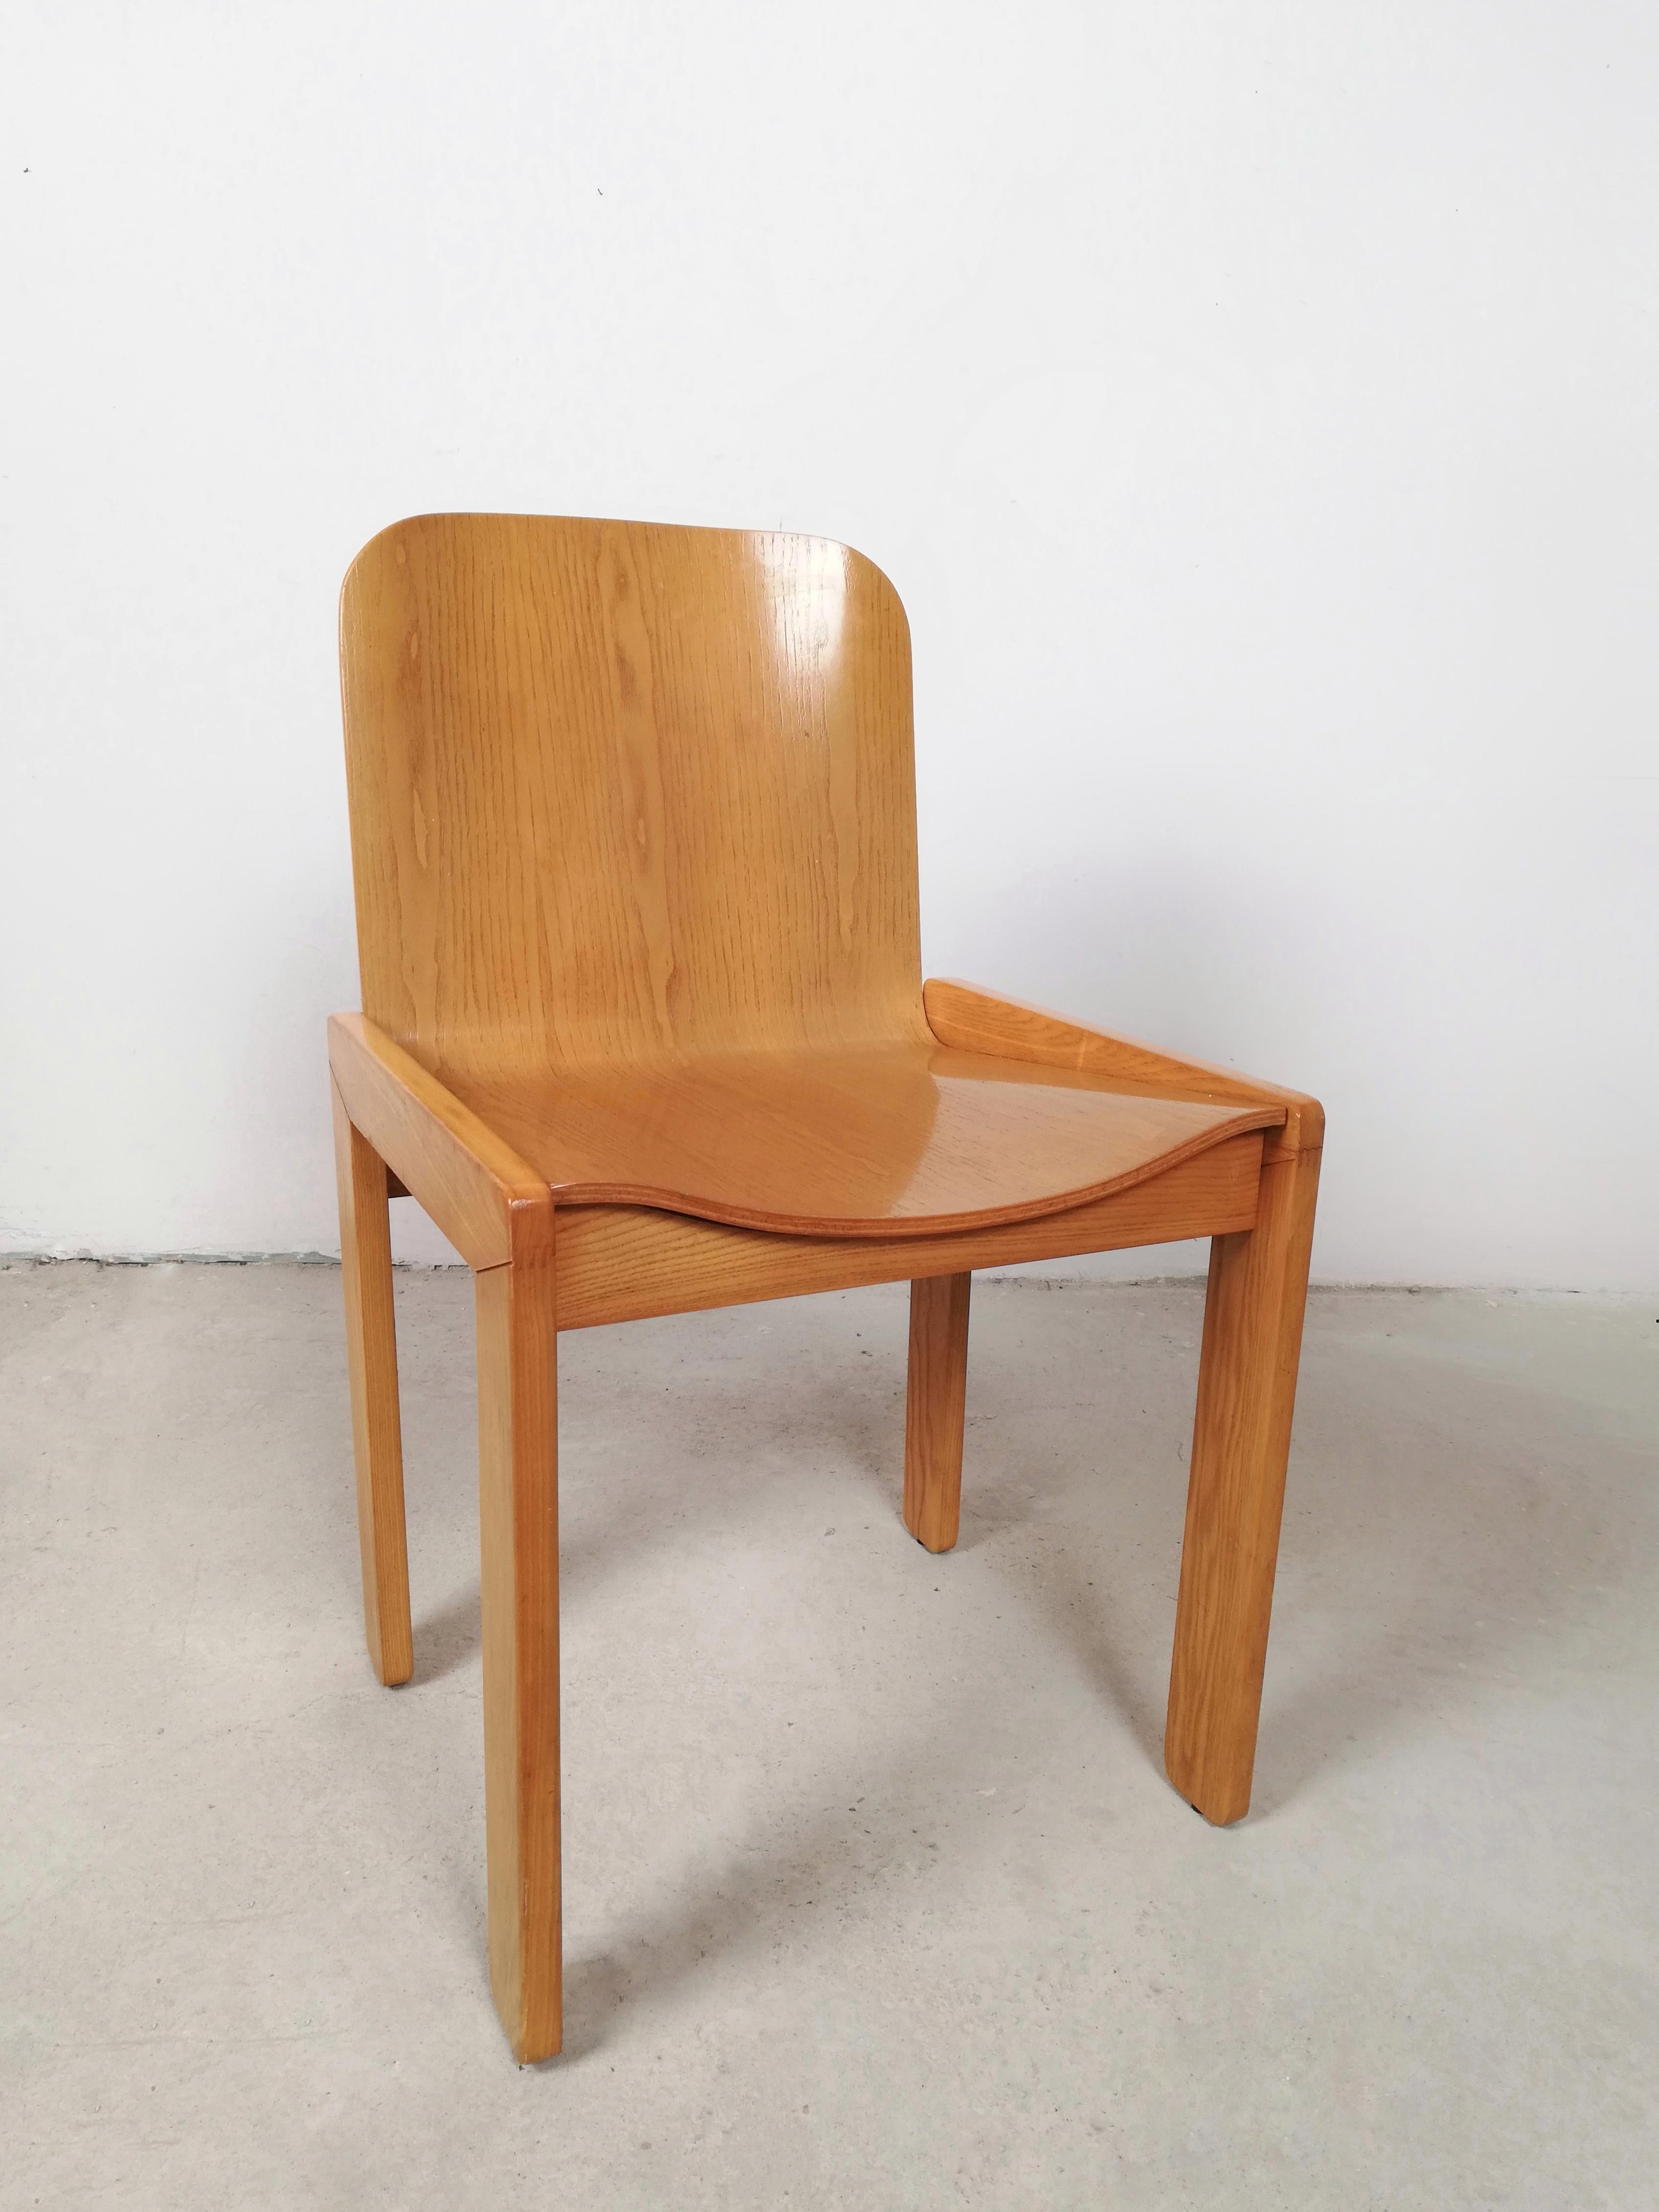 6 Curved Plywood Dining Chairs by Molteni in the style of Scarpa, Italy, 1970s For Sale 6